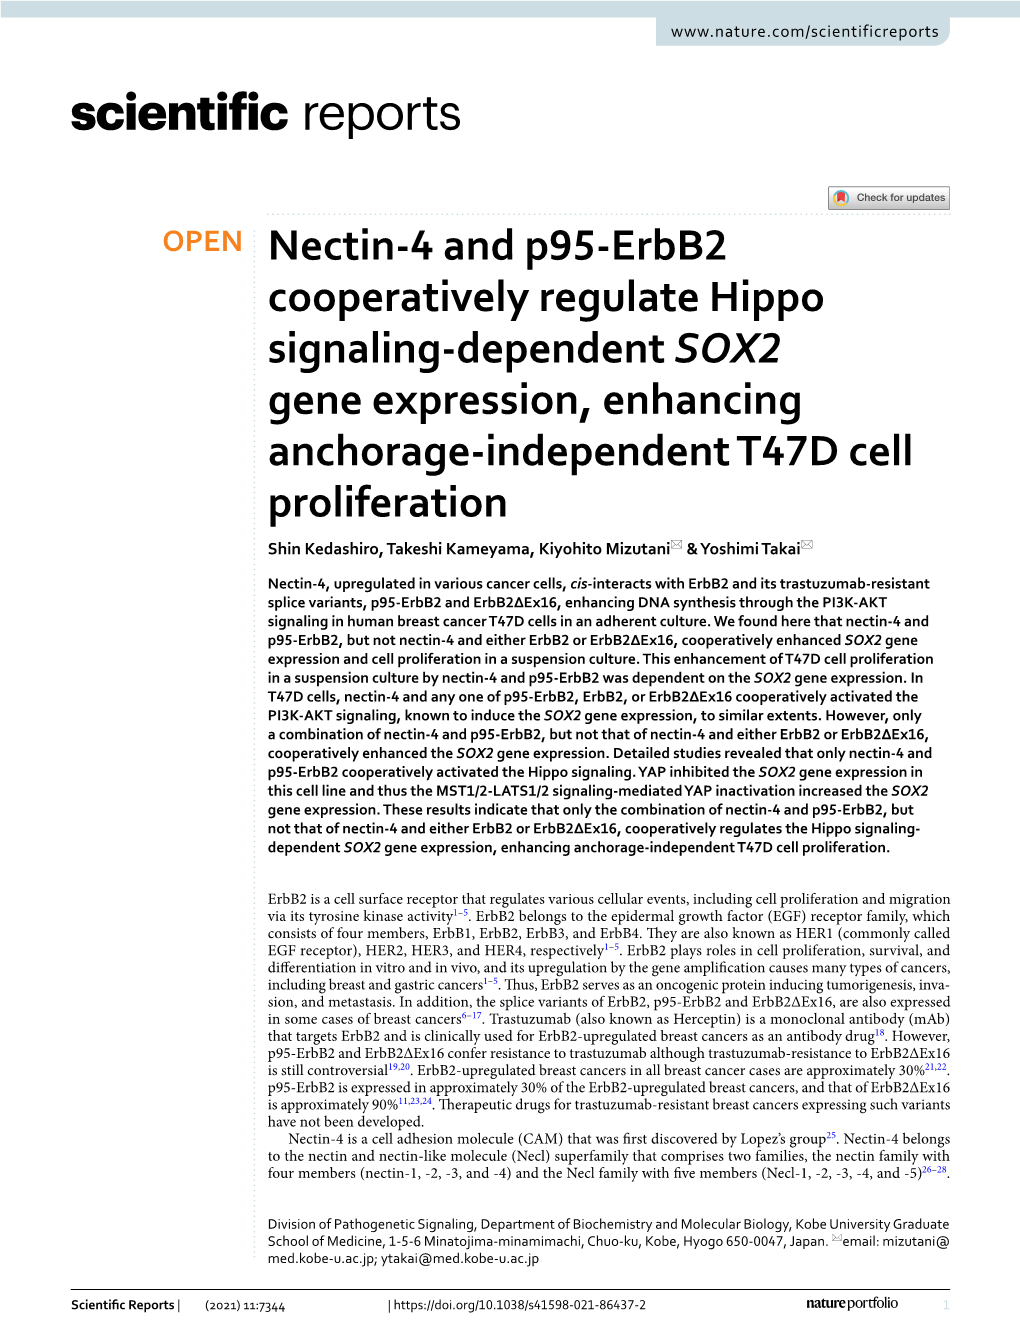 Nectin-4 and P95-Erbb2 Cooperatively Regulate Hippo Signaling